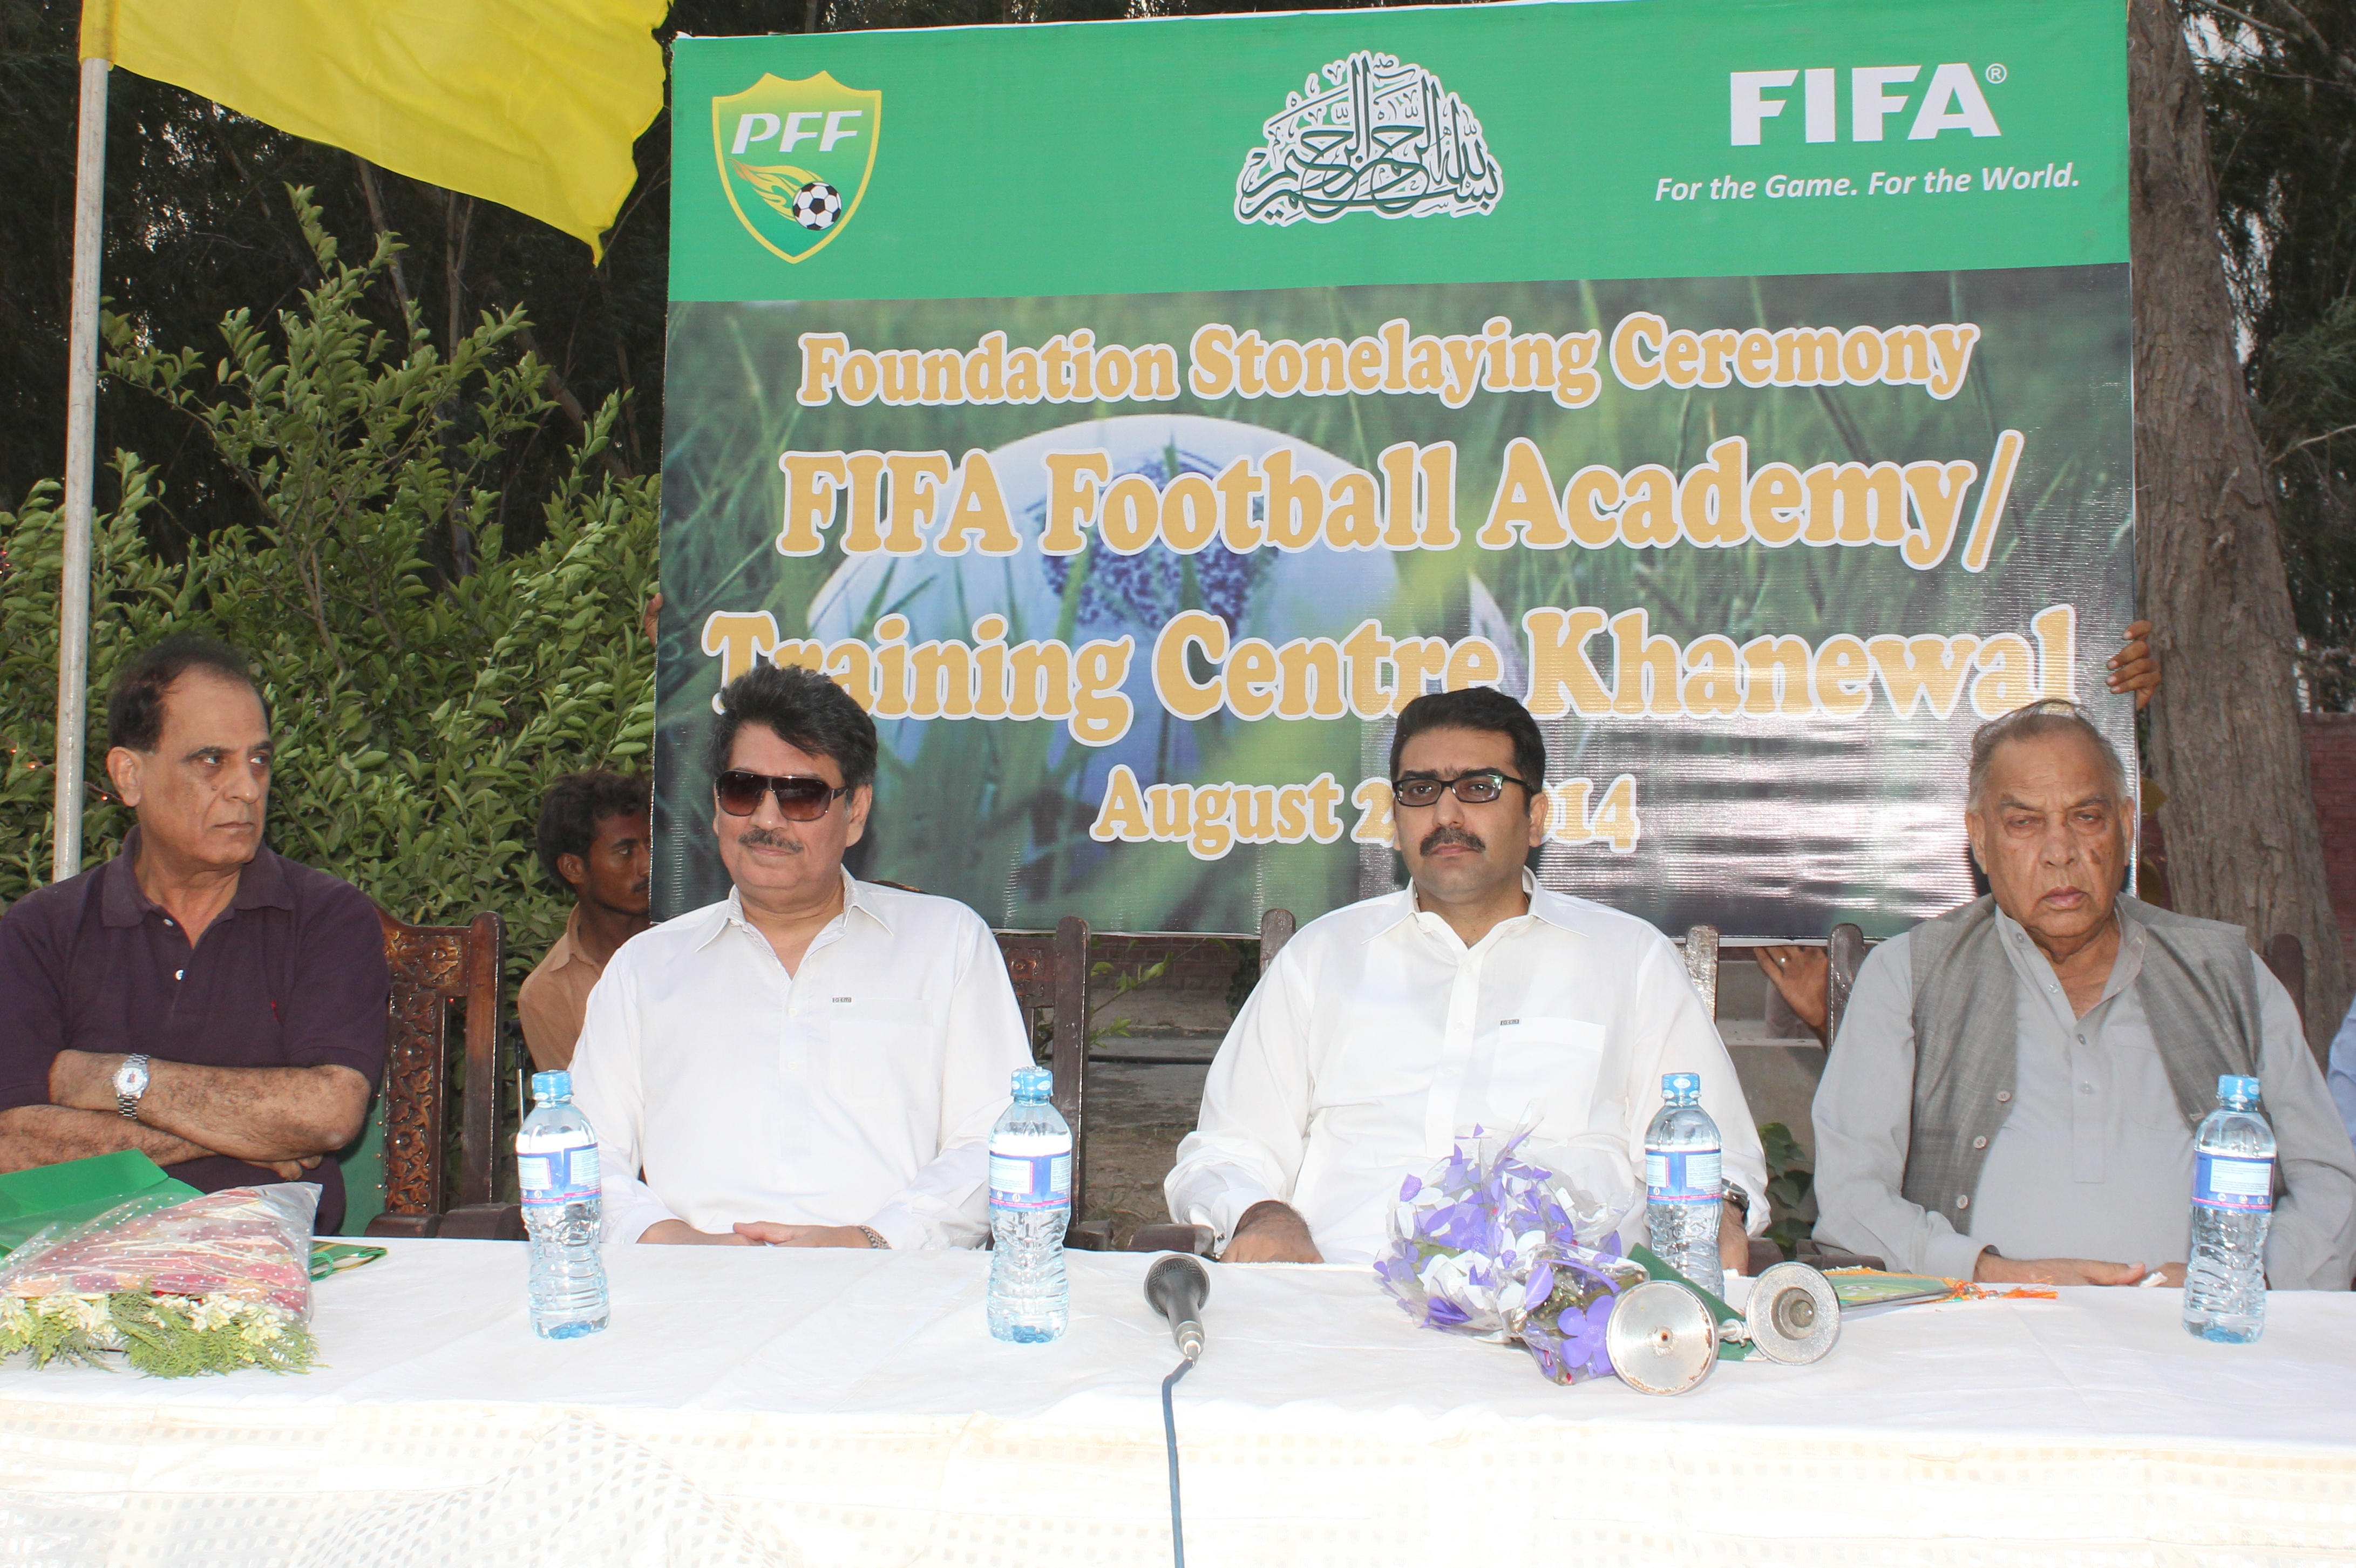 PFF launch FIFA Academy and Training centre in Khanewal